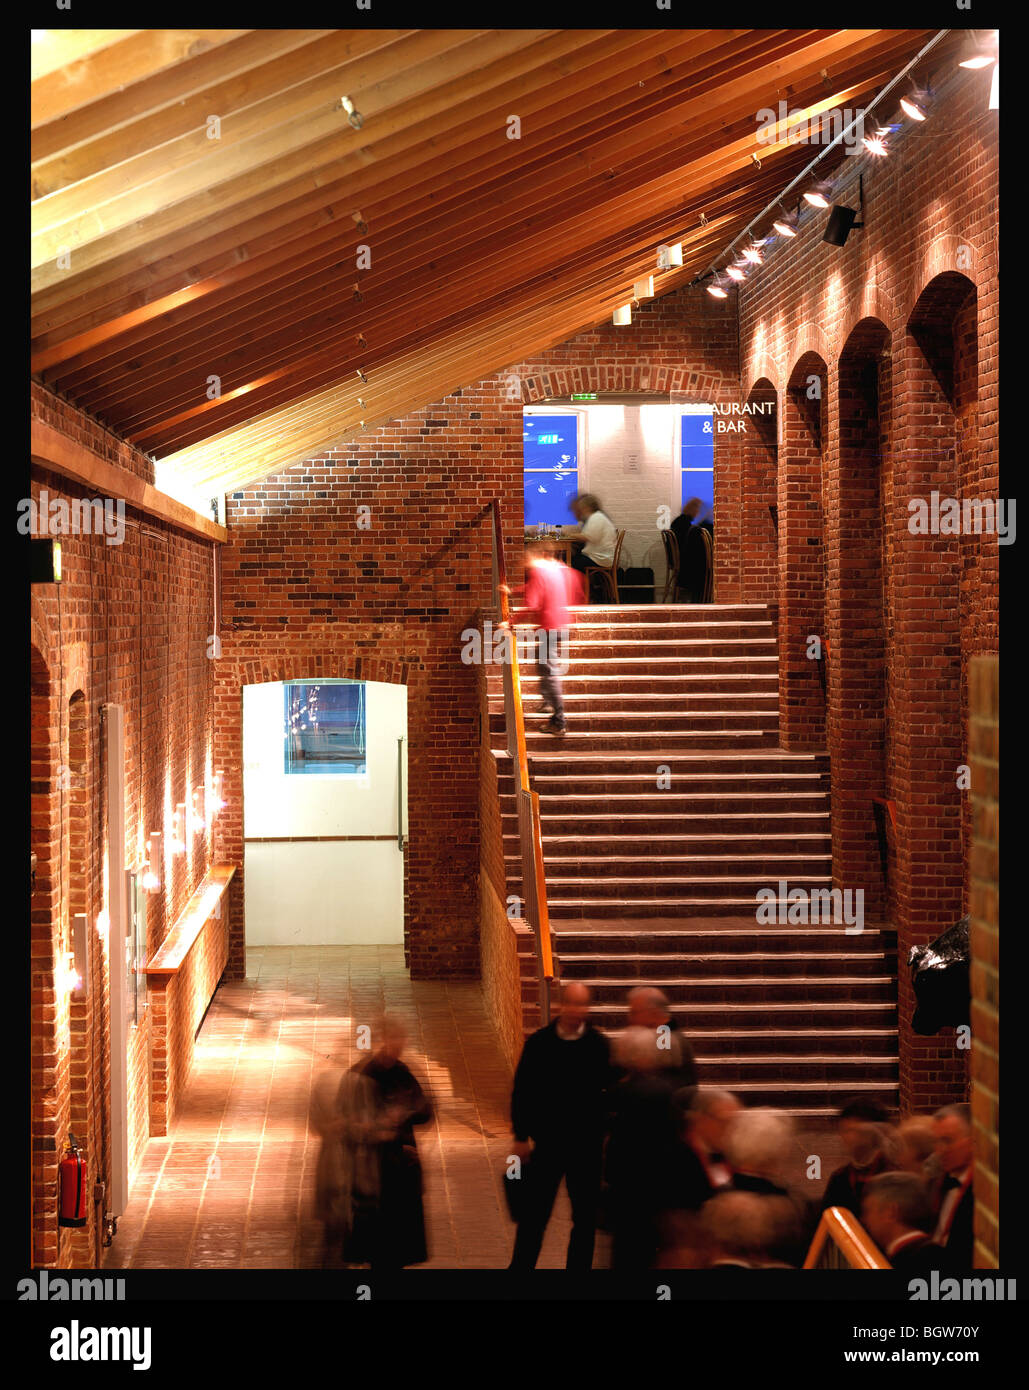 snape maltings concert hall (aldeburgh productions) entrance with stairs Stock Photo